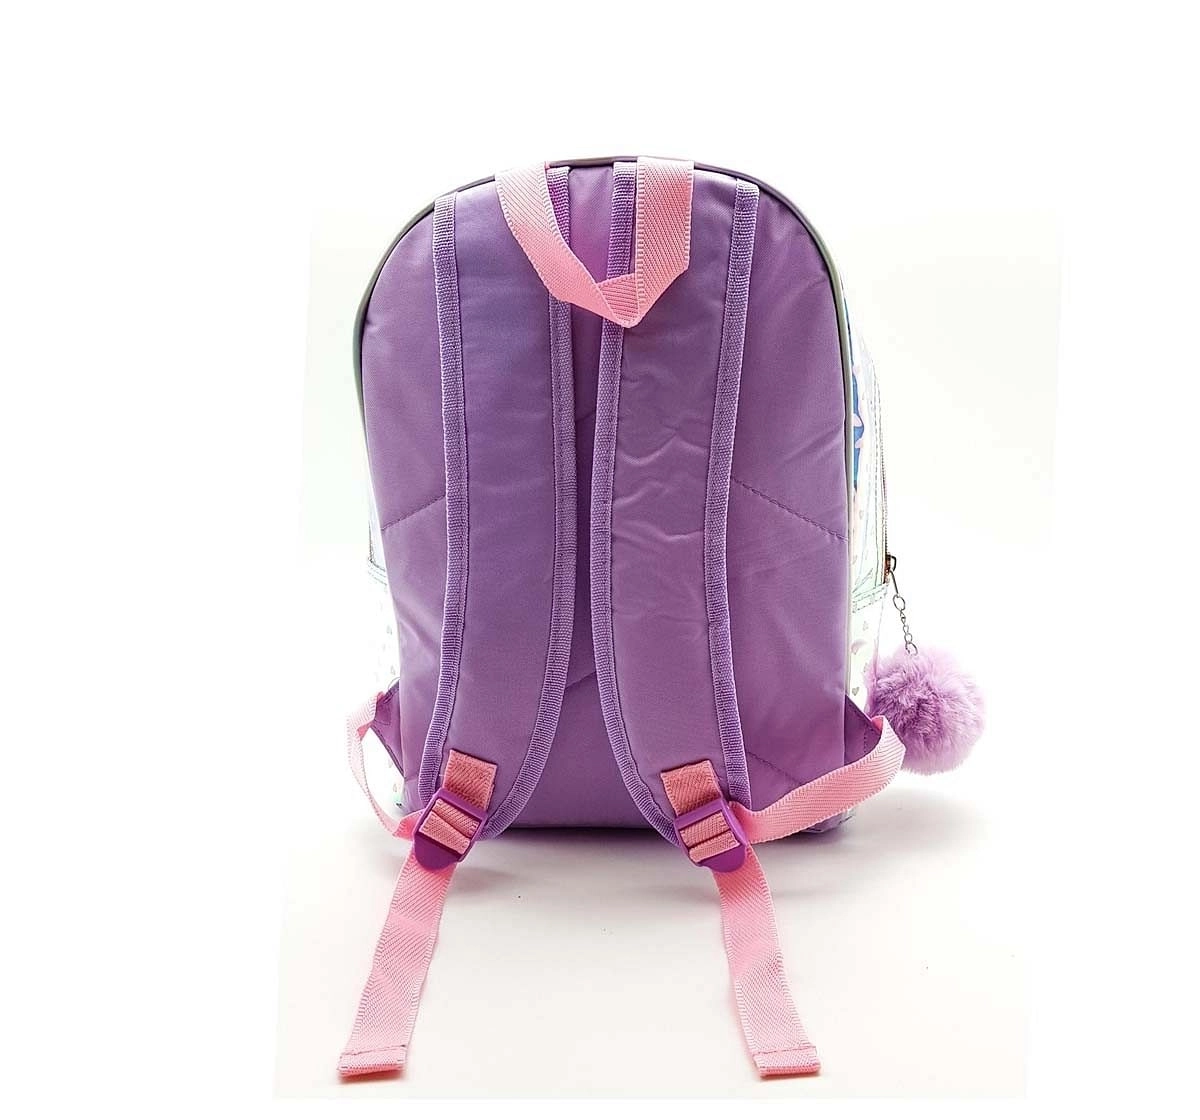 Hamster London Shiny Heart Backpack Travel for Kids Age 3Y+